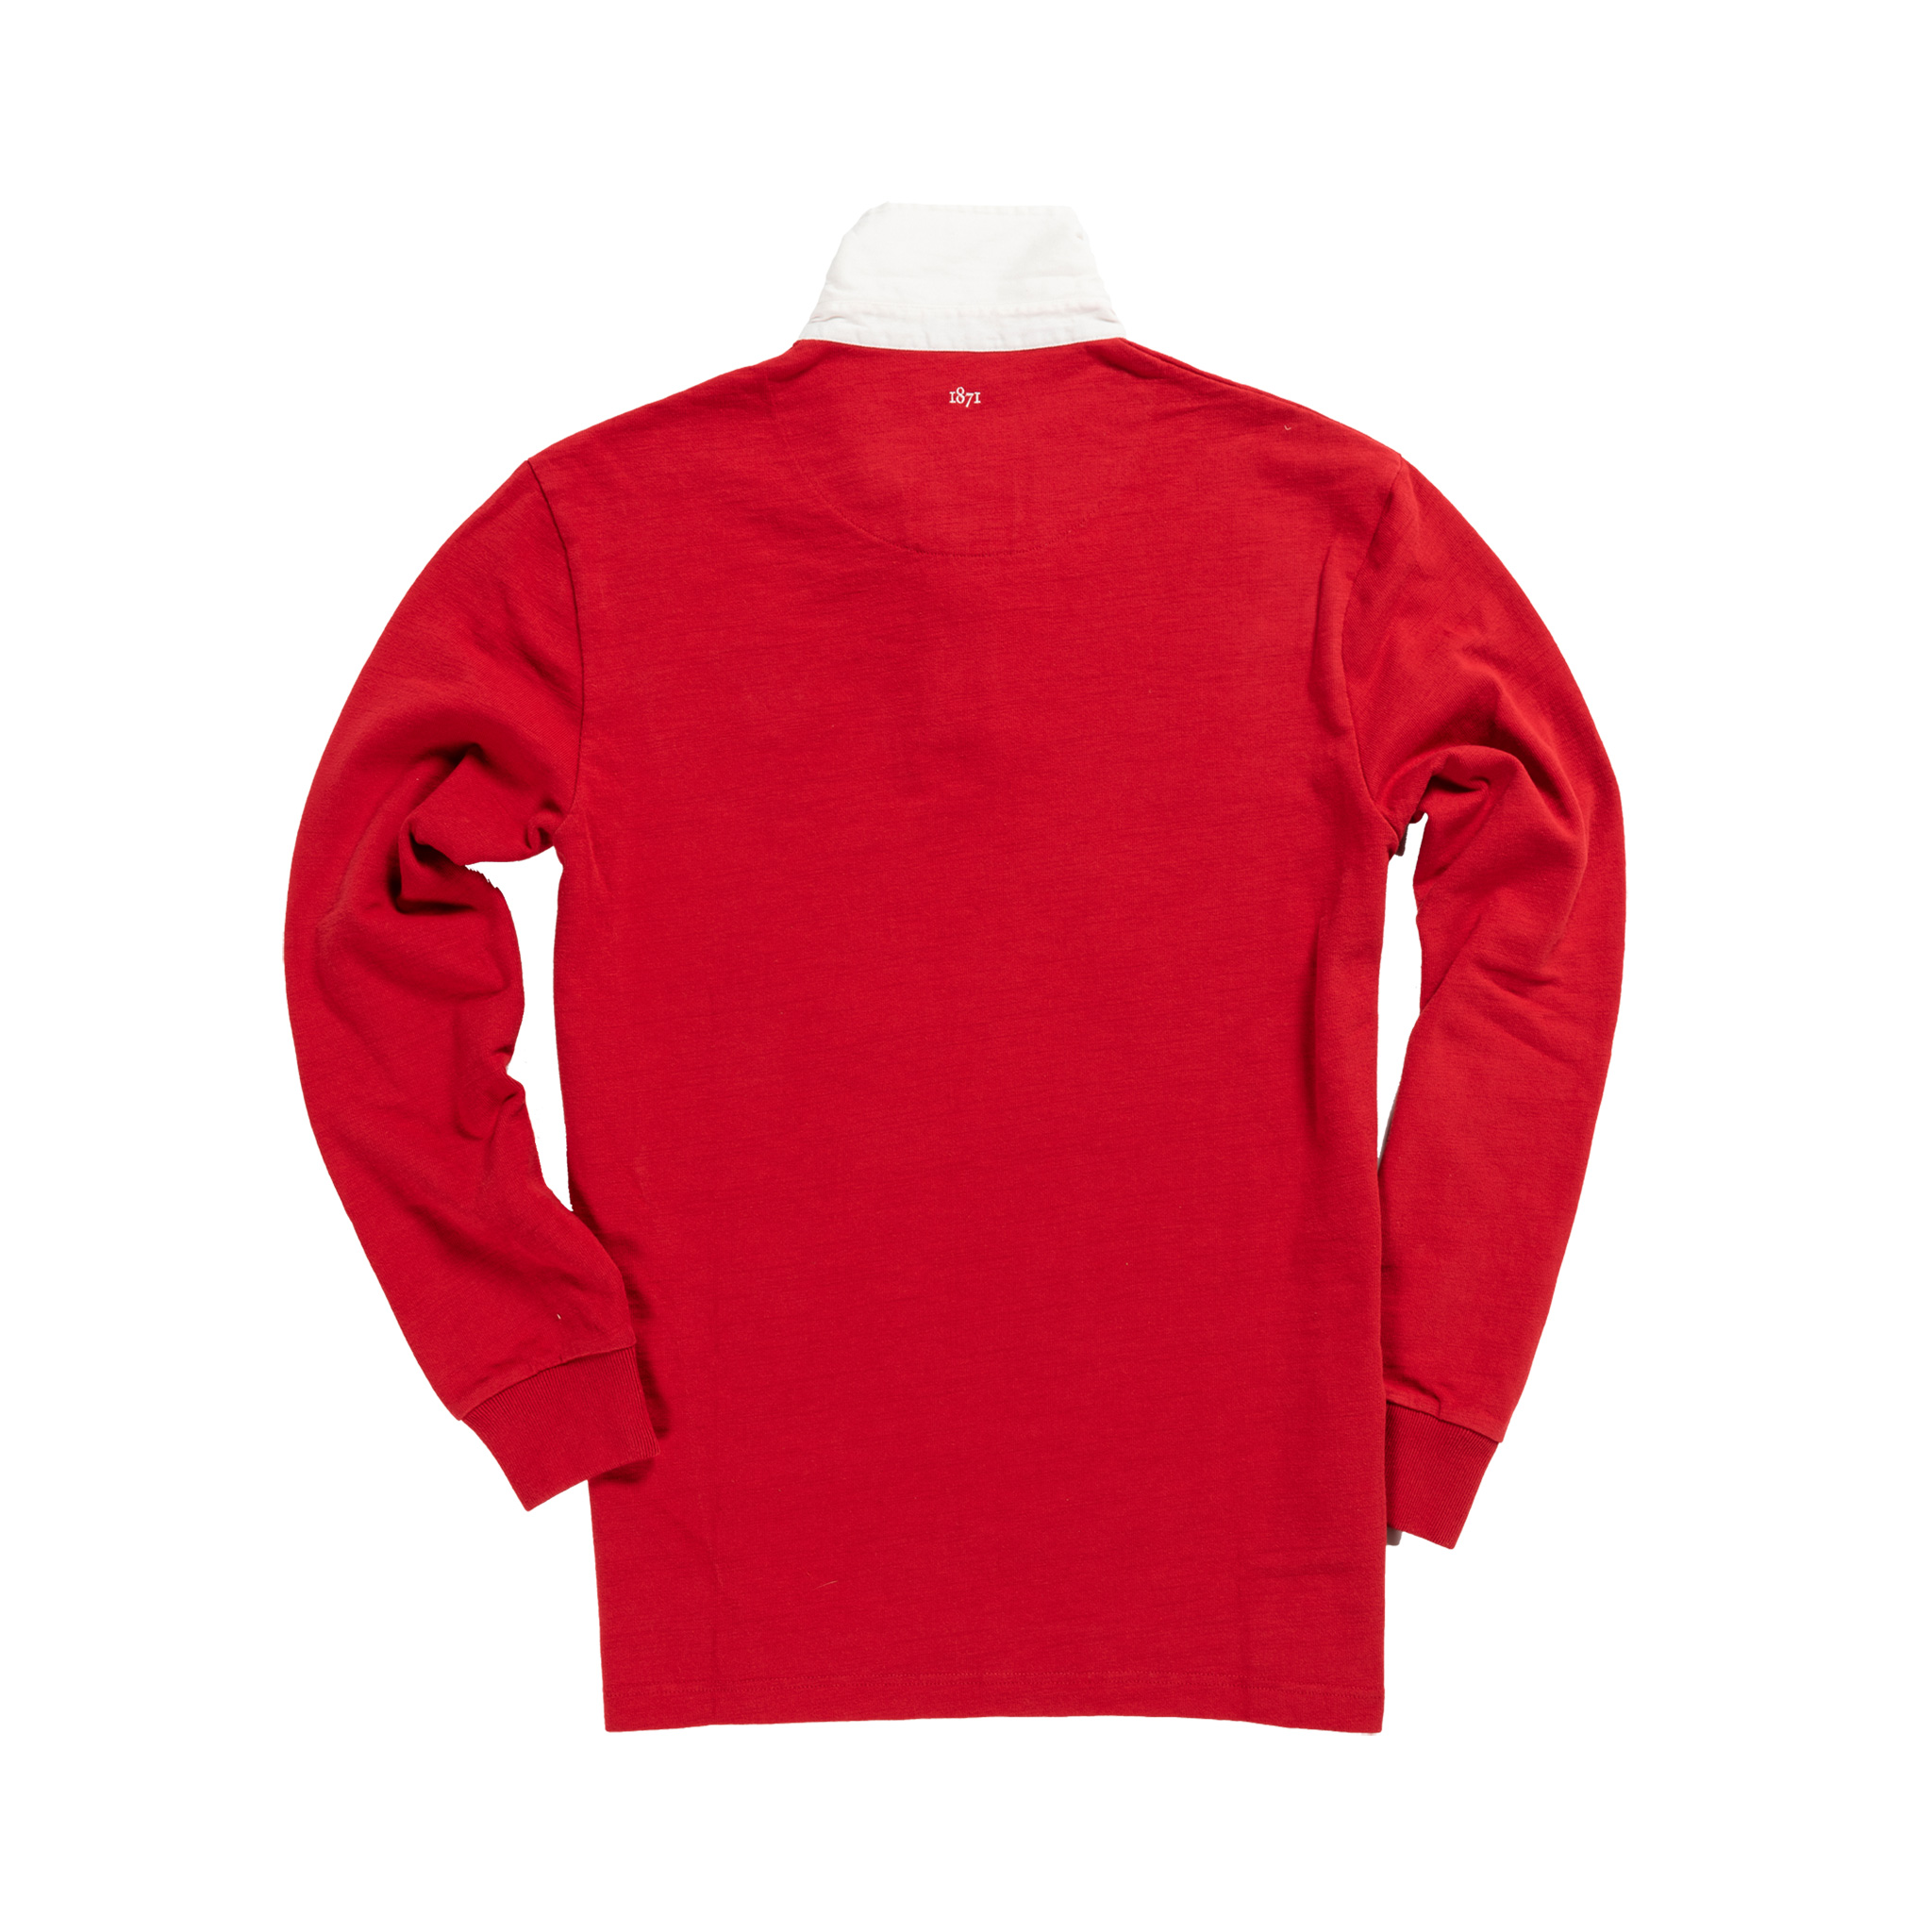 Classic Red 1871 Vintage Rugby Shirt